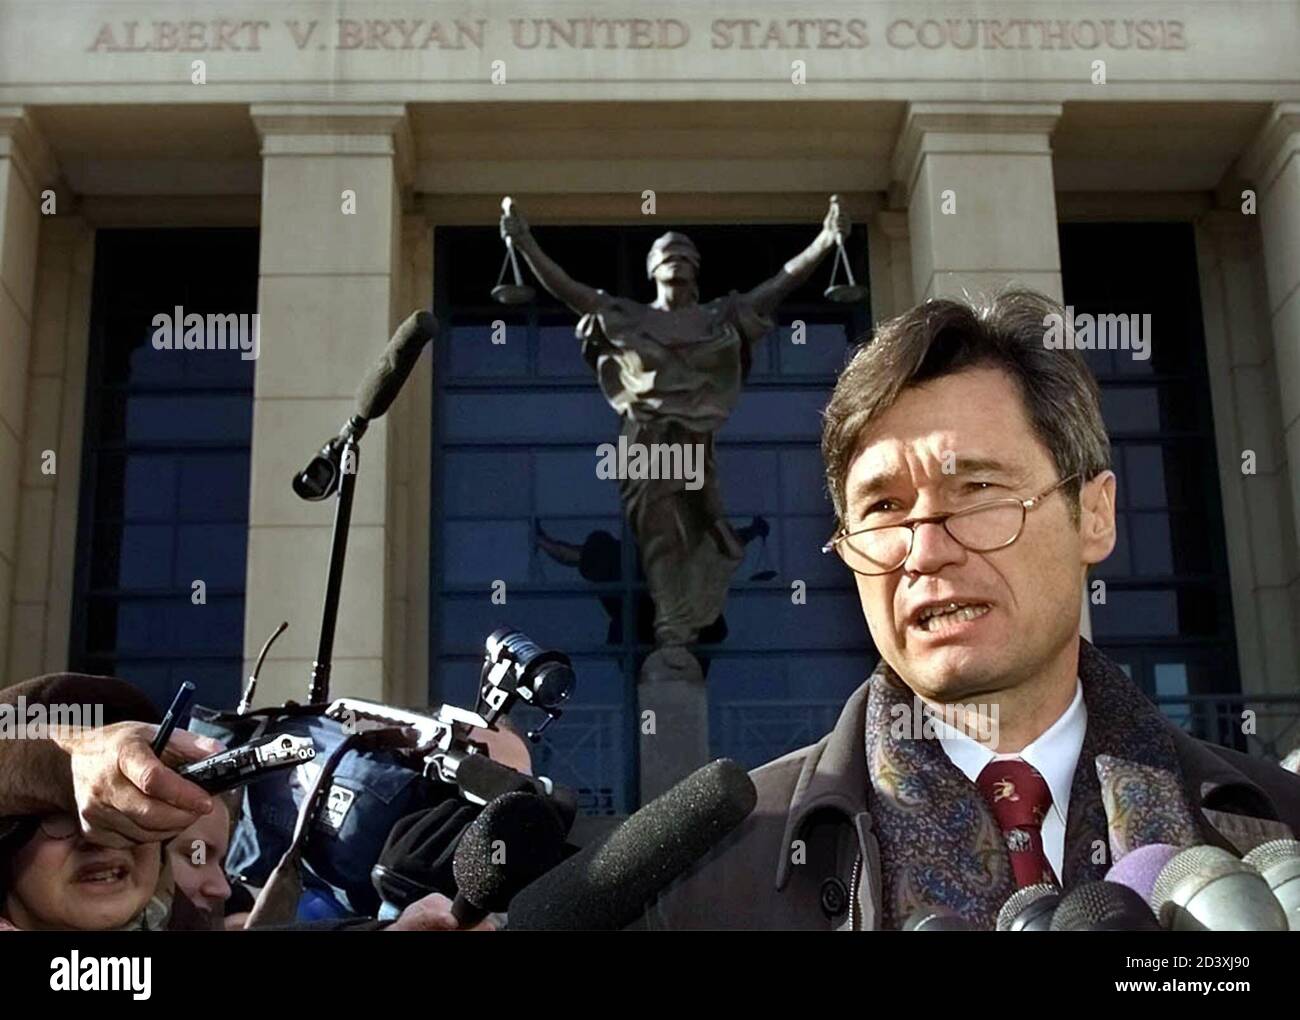 Francois Roux, the attorney [representing the mother of Zacarias Moussaoui, speaks outside the Albert Bryan U.S. Courthouse in Alexandria, Virginia January 2, 2002. Roux said Moussaoui's mother, Aicha el-Wafi, said she decided not to attend the hearing.] Stock Photo